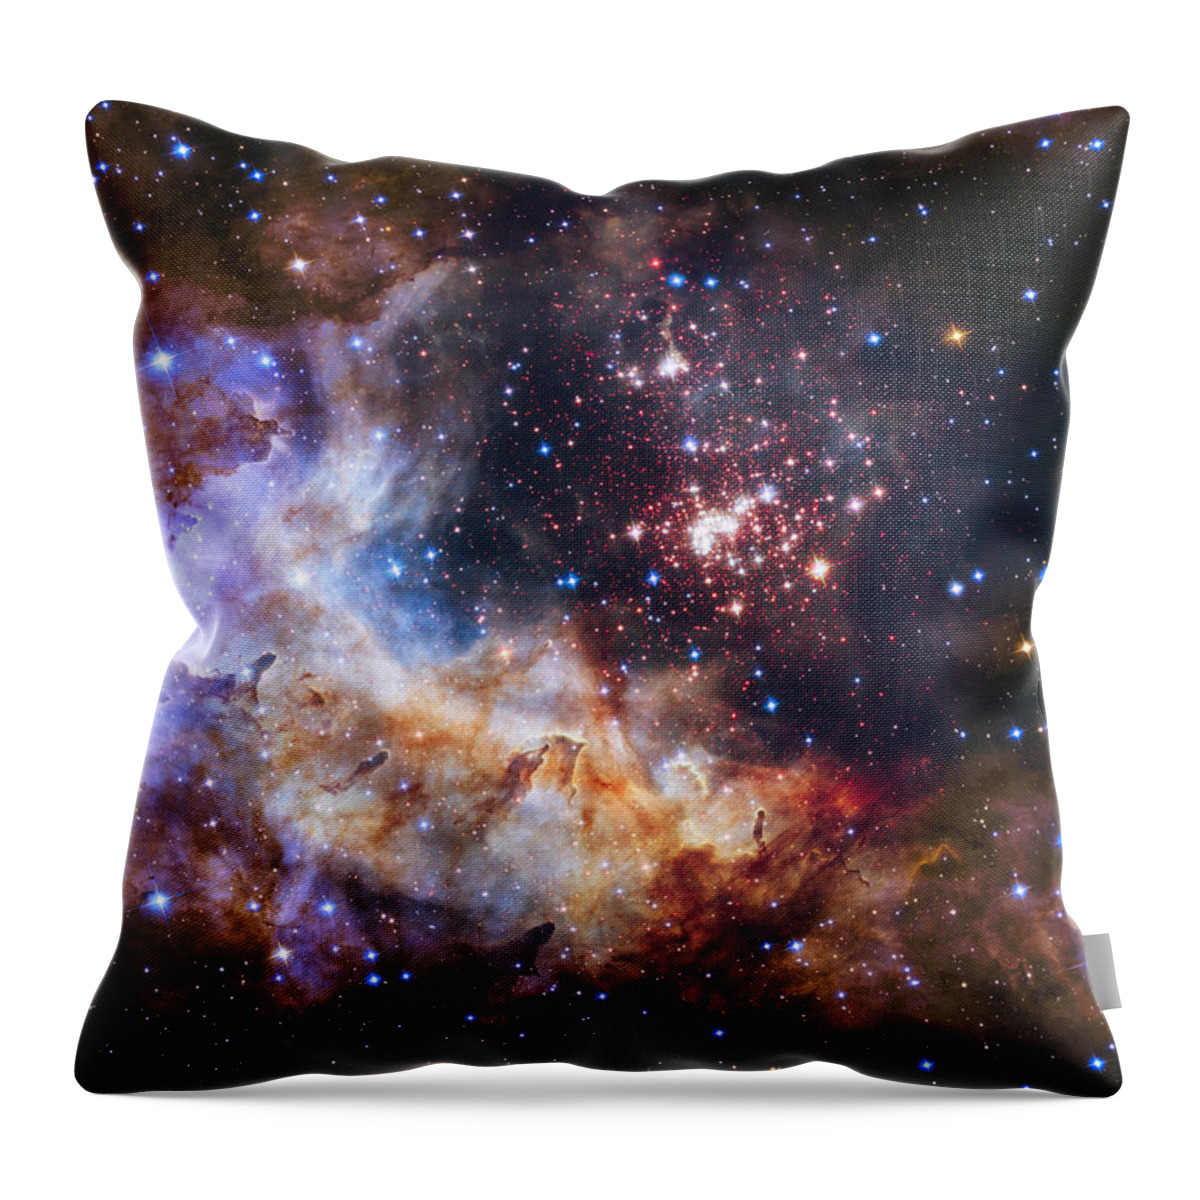 3scape Throw Pillow featuring the photograph Westerlund 2 - Hubble 25th Anniversary Image by Adam Romanowicz